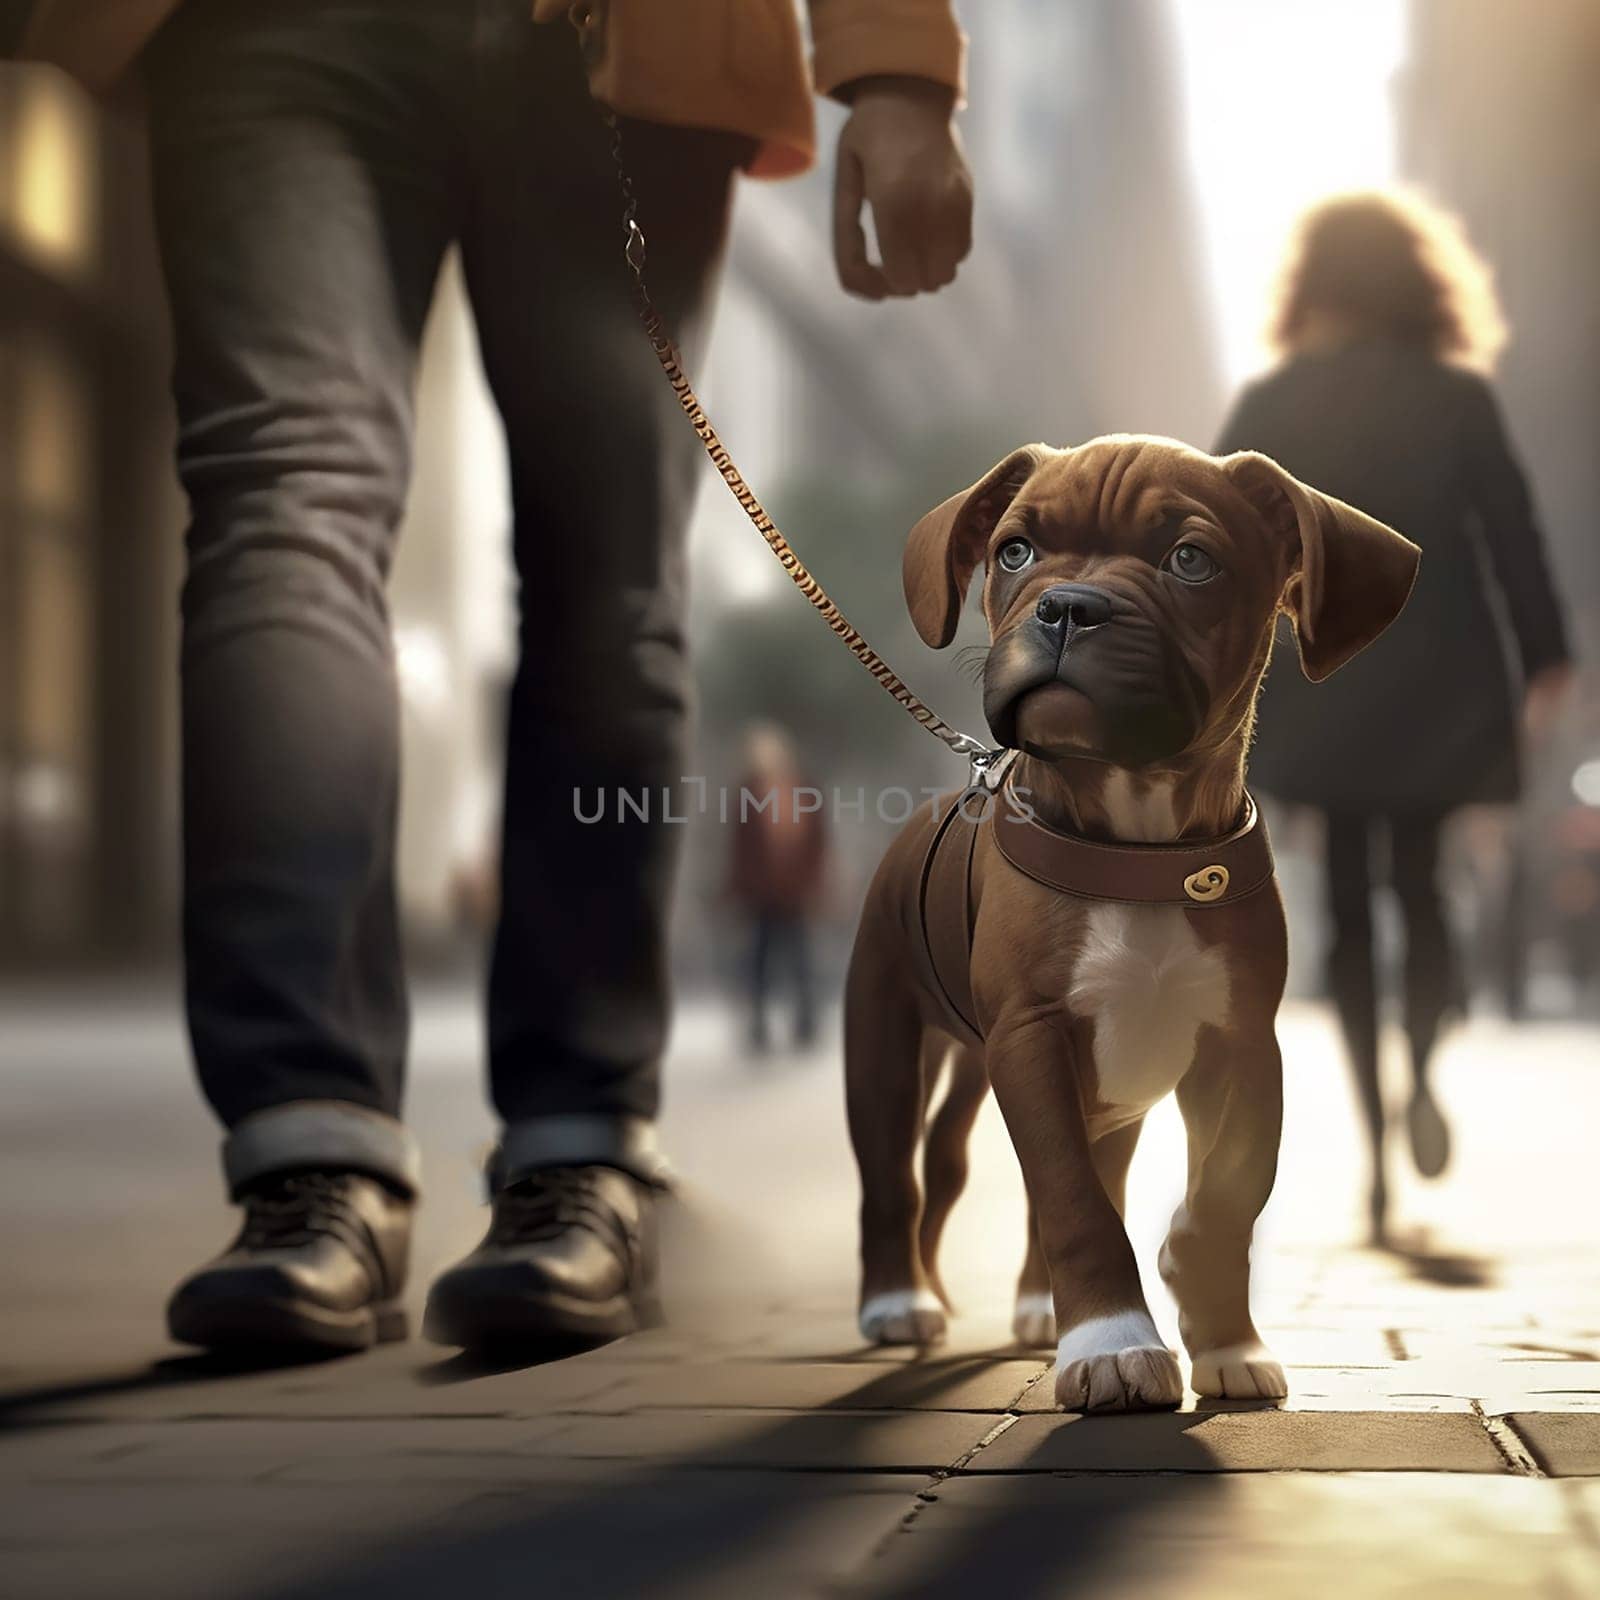 Puppy walking with owner in the city, family, pet, domestic animal, season and people concept happy man with puppy dog walking in city street morning light by Annebel146